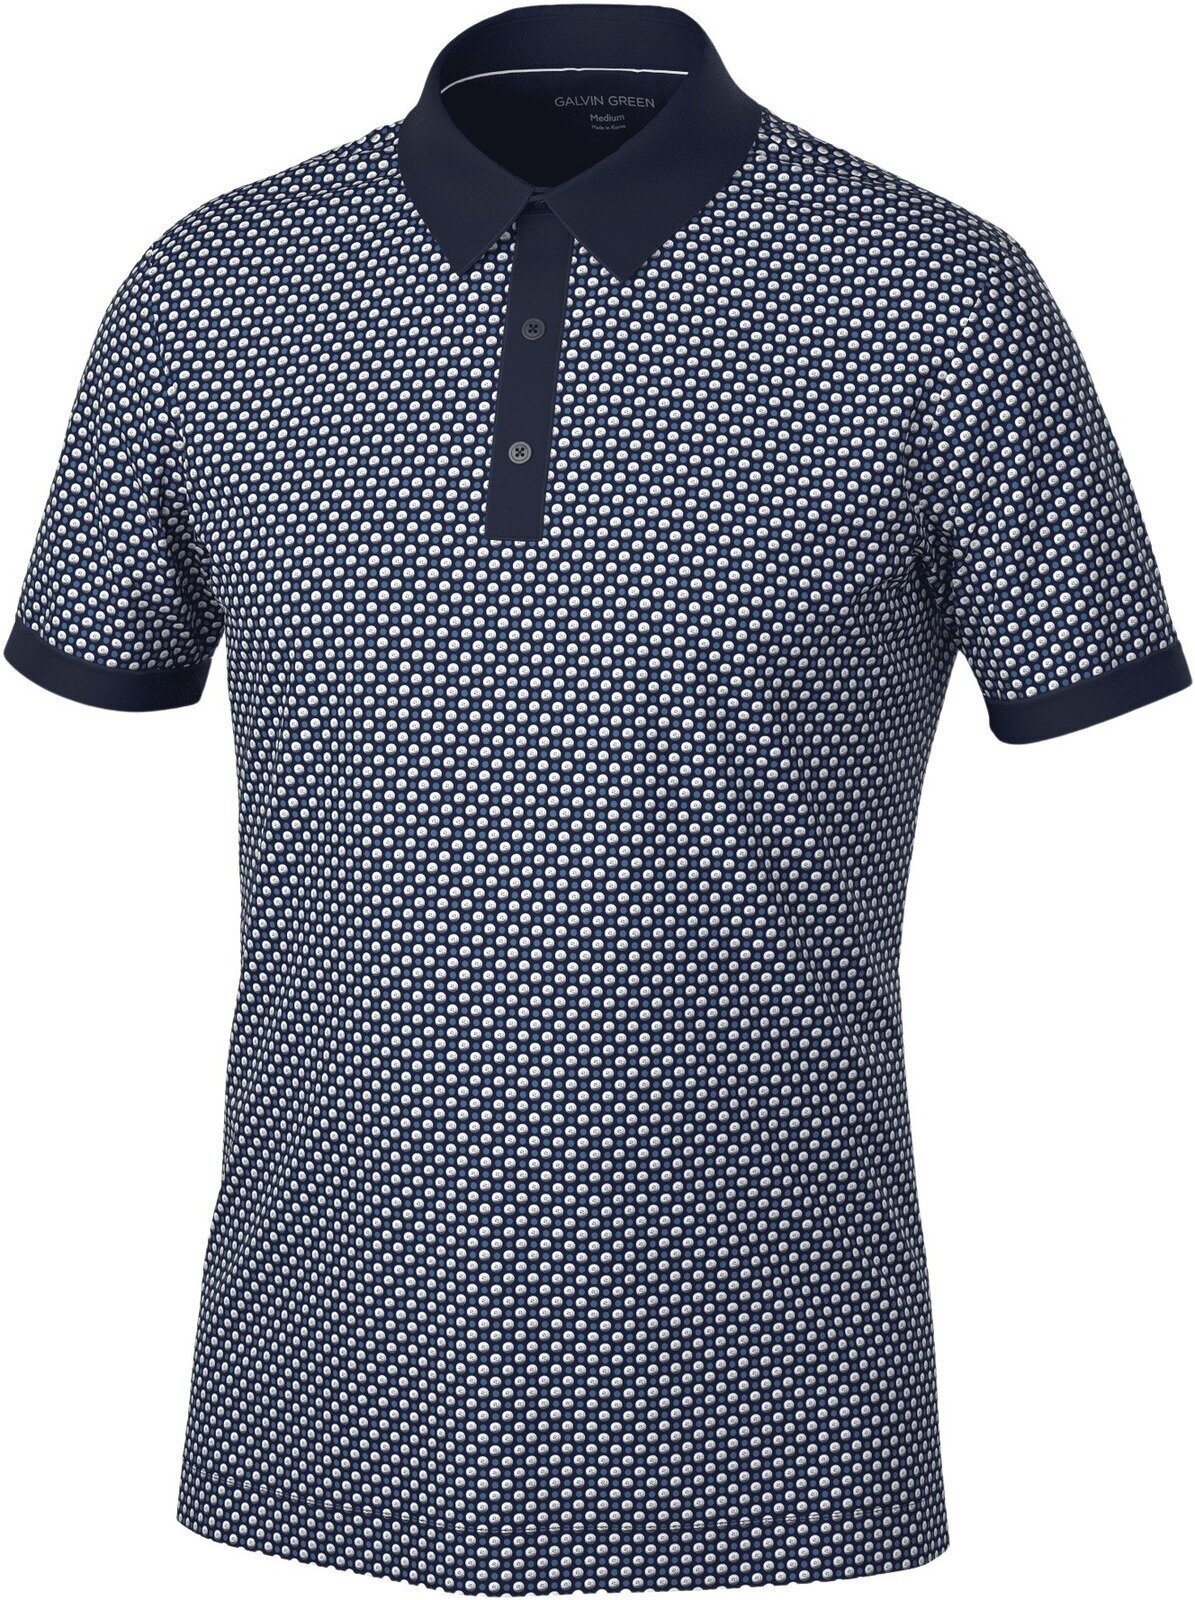 Chemise polo Galvin Green Mate Mens Polo Shirt Cool Grey/Navy XL Chemise polo